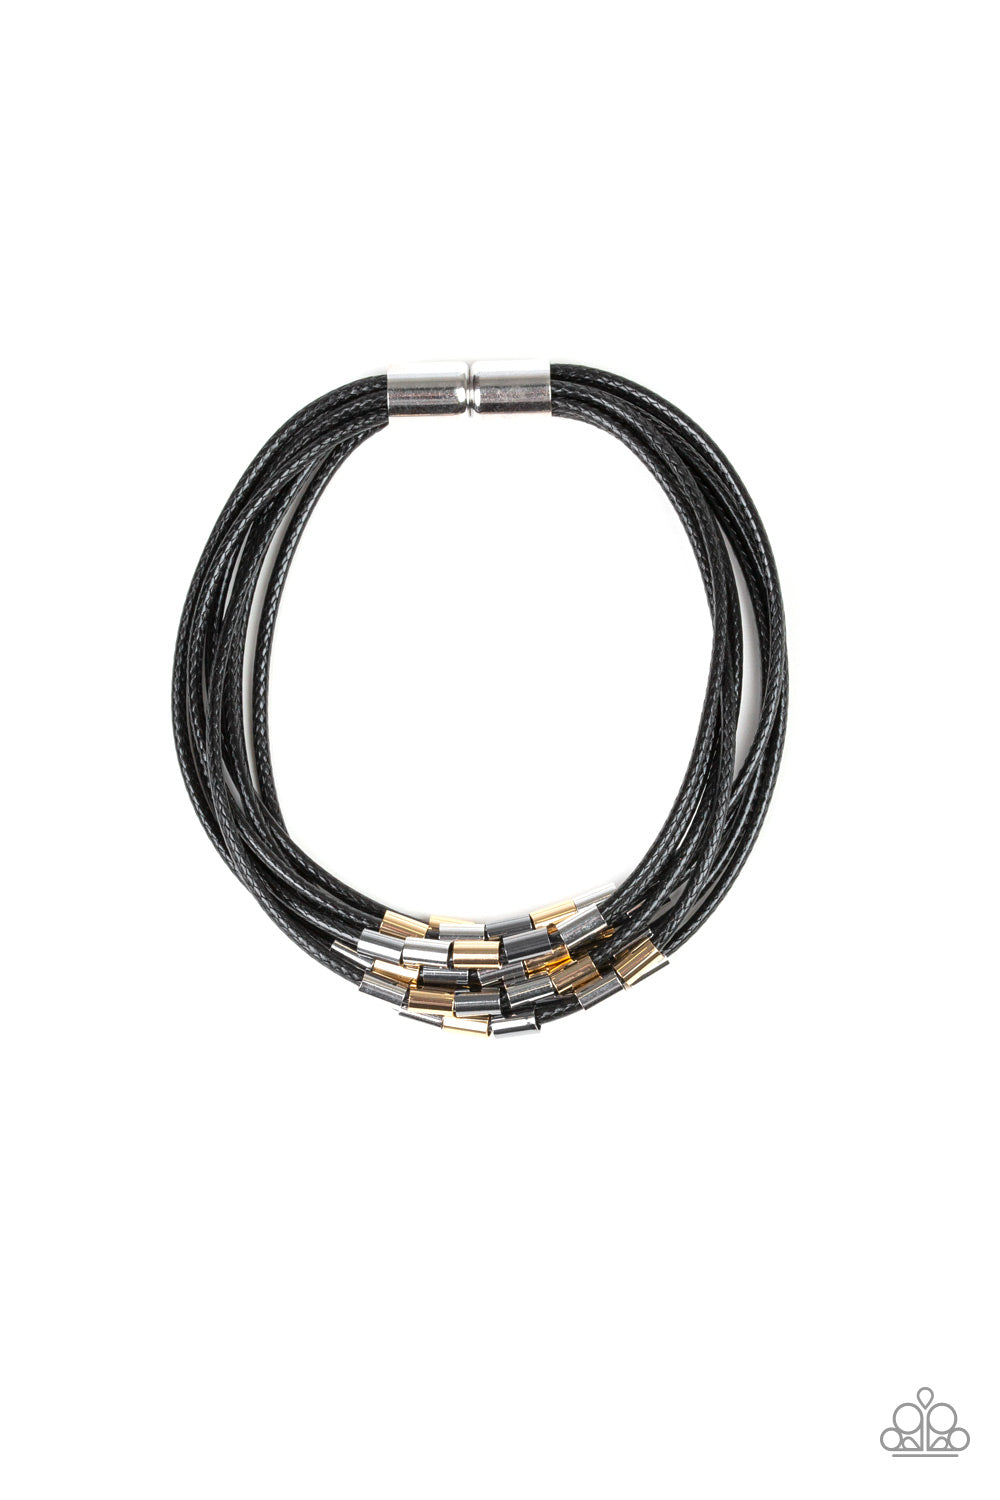 Paparazzi Lay Low - Multi - Gold, Gunmetal and Silver - Magnetic Closure - Bracelet - $5 Jewelry with Ashley Swint